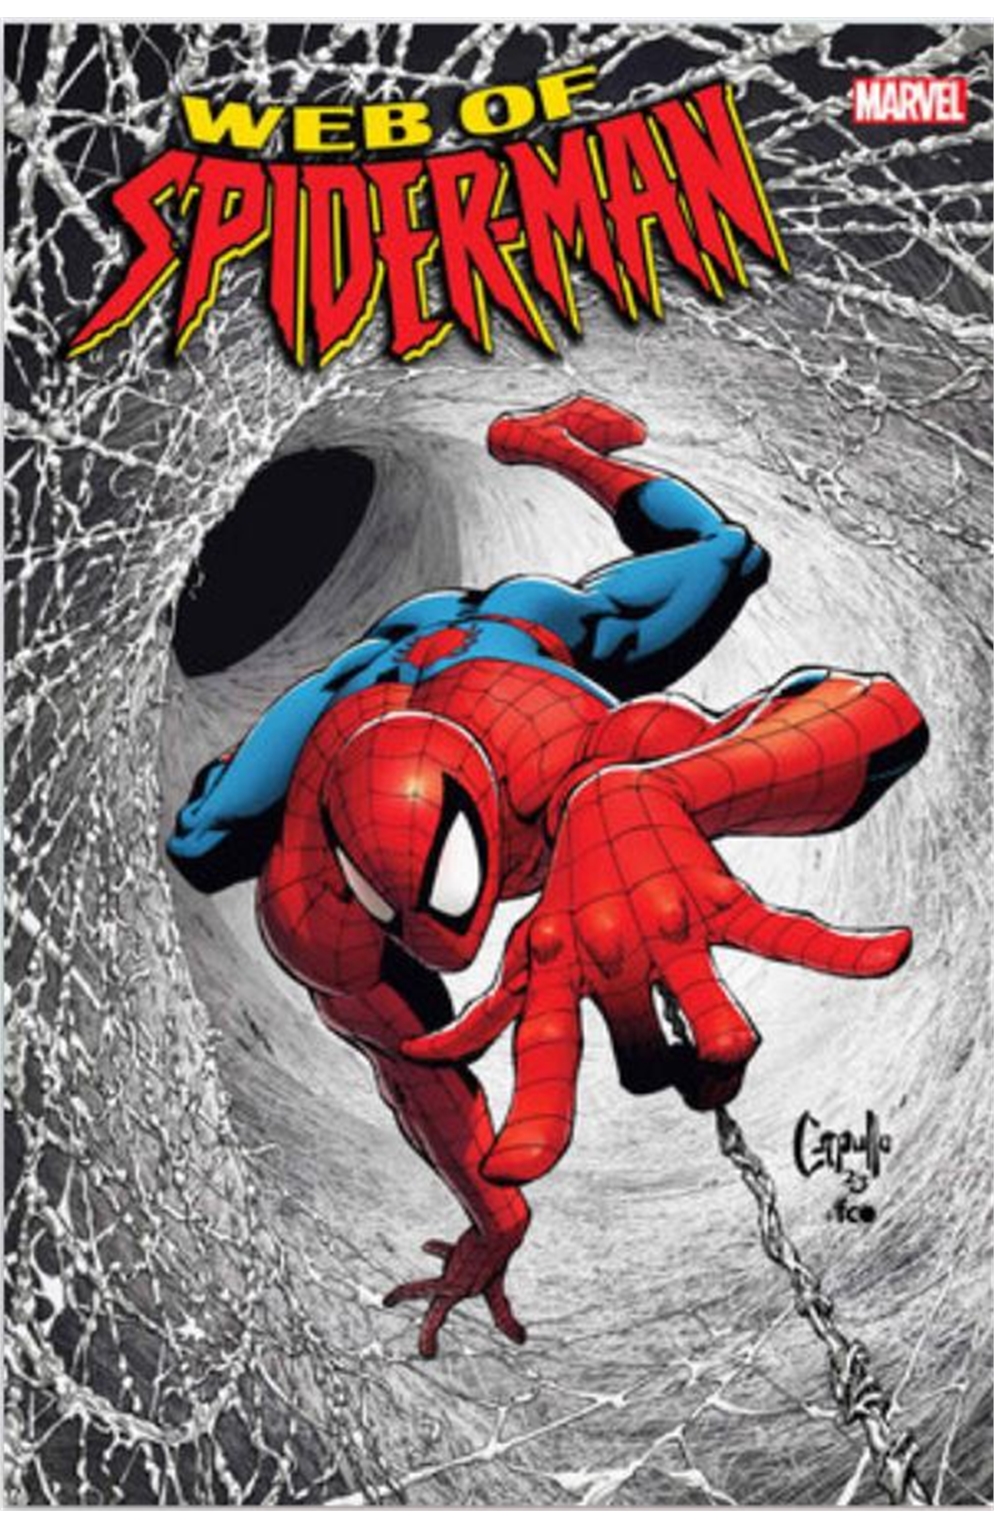 Web of Spider-Man #1 By Greg Capullo Folded Poster